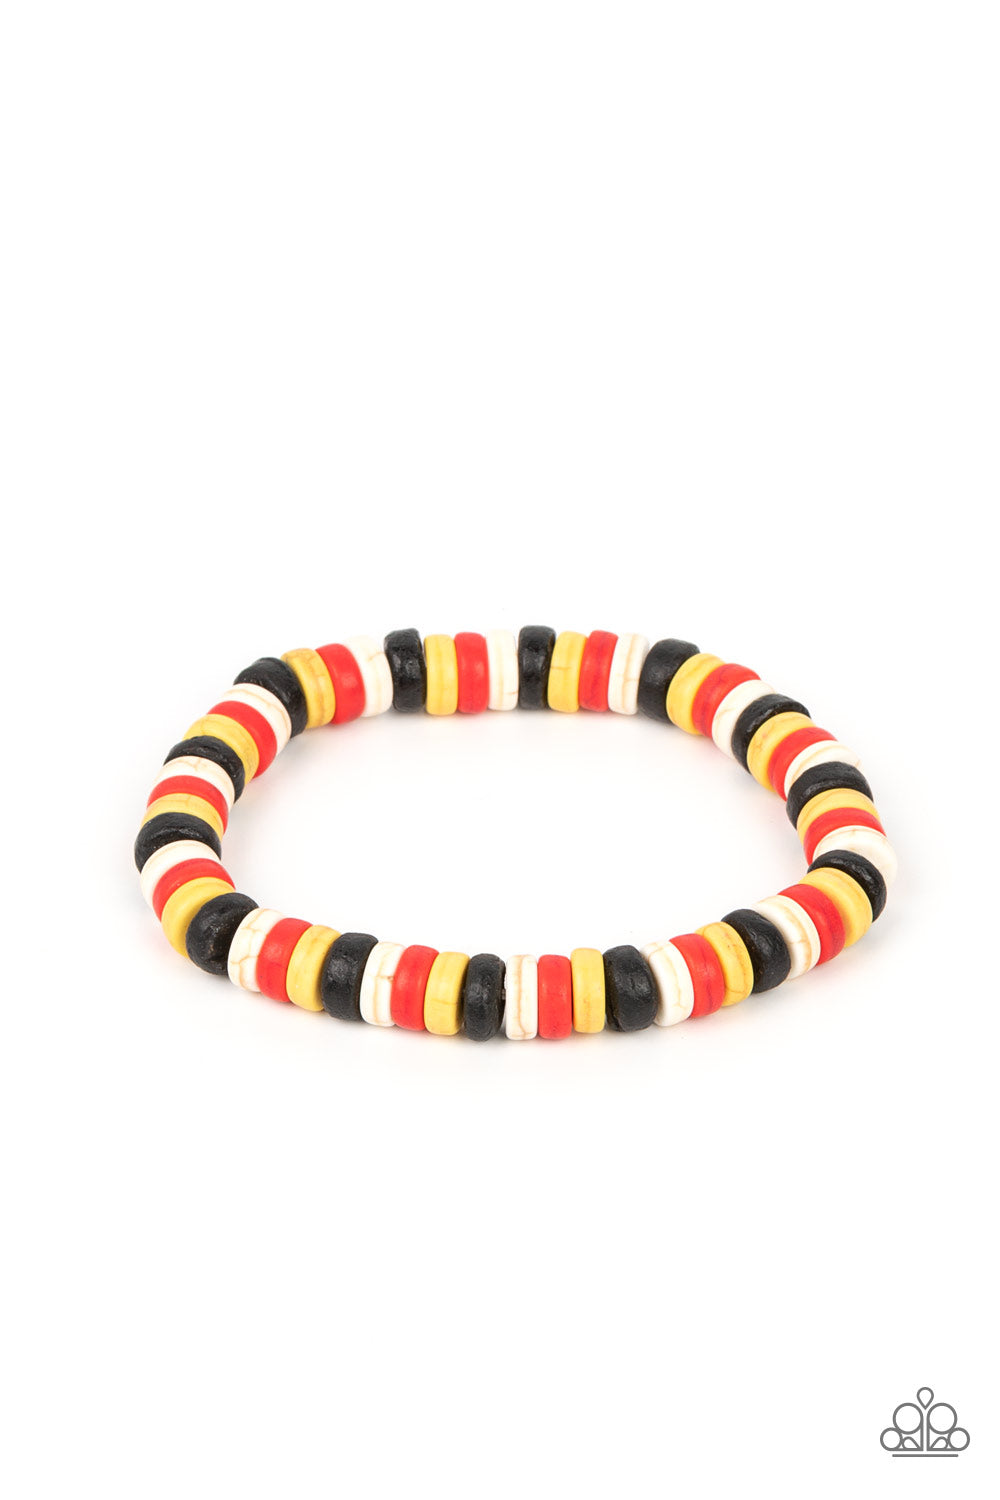 Rural Rocker Red Bracelet - Paparazzi Accessories  Imperfect black, yellow, red, and white stone discs are threaded along stretchy bands, creating a rustic pop of color around the wrist.  Sold as one individual bracelet.  P9SE-URRD-150XX